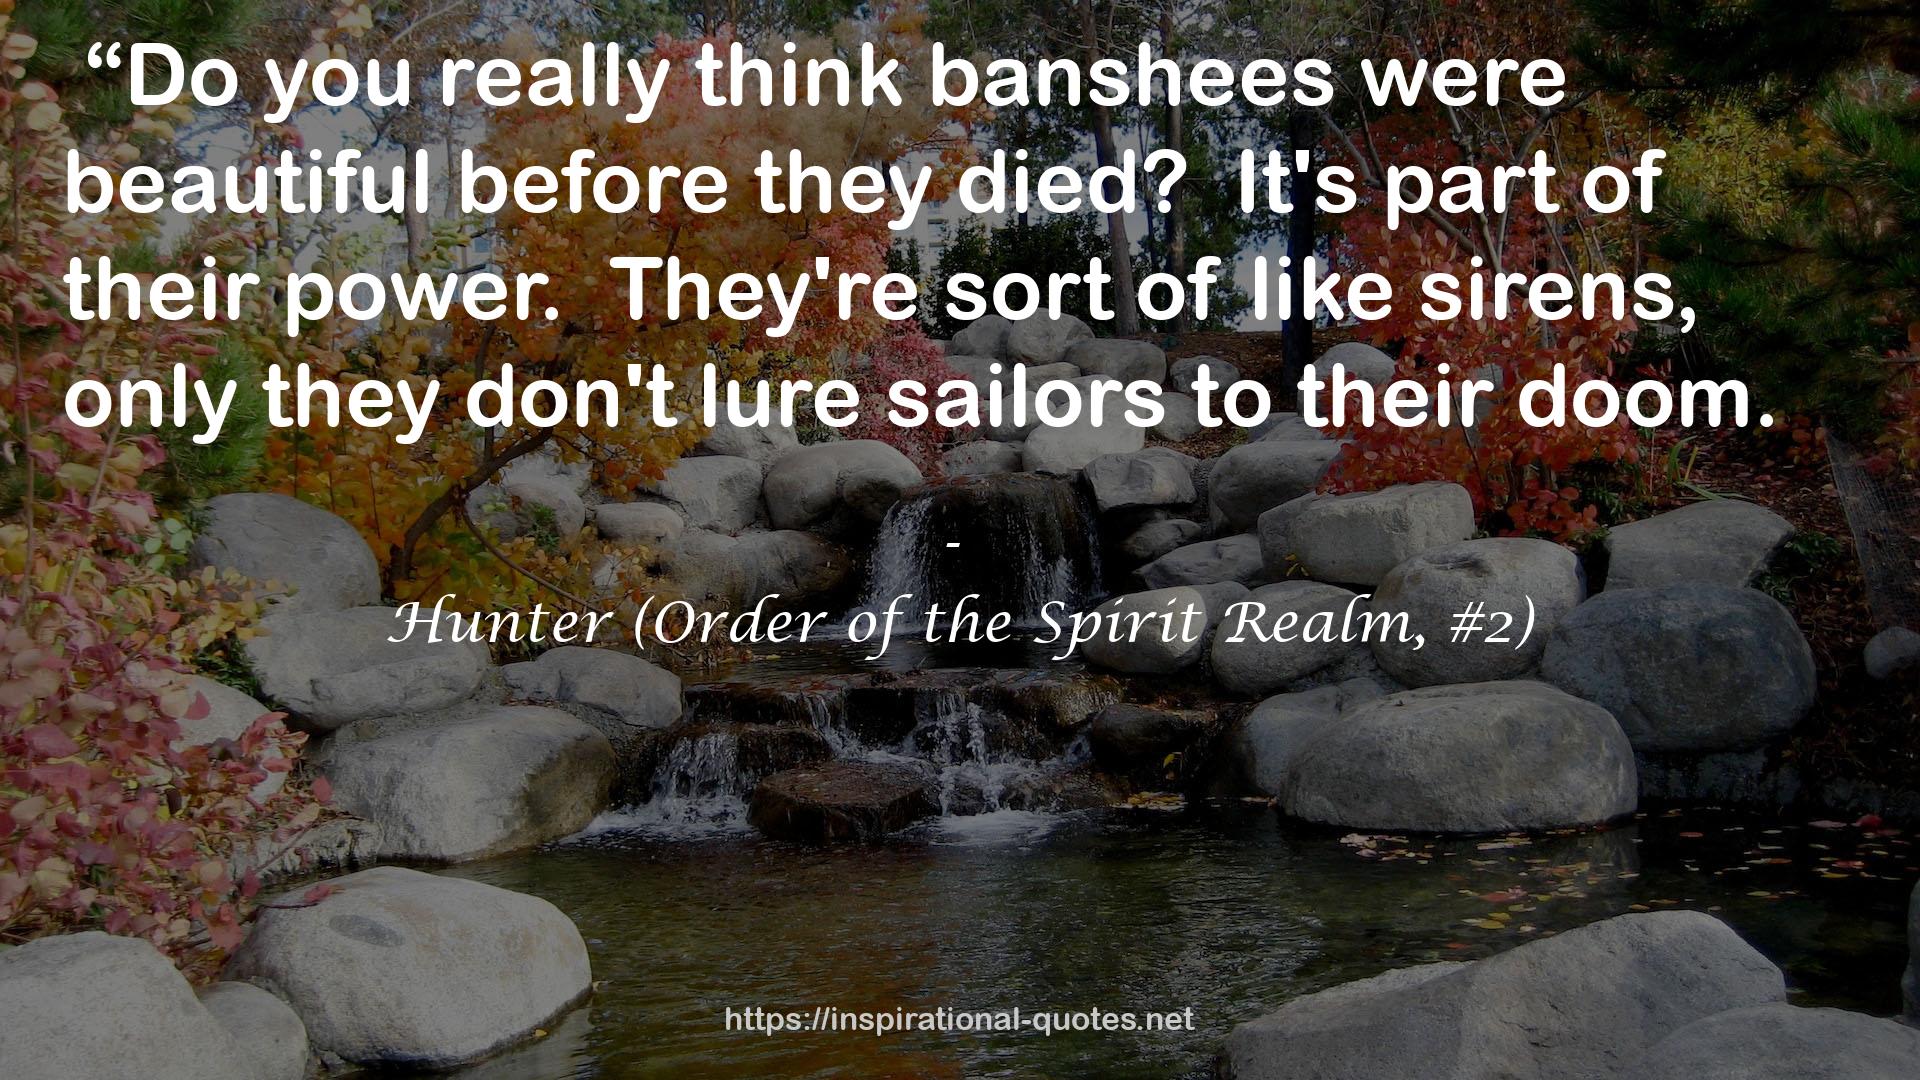 Hunter (Order of the Spirit Realm, #2) QUOTES